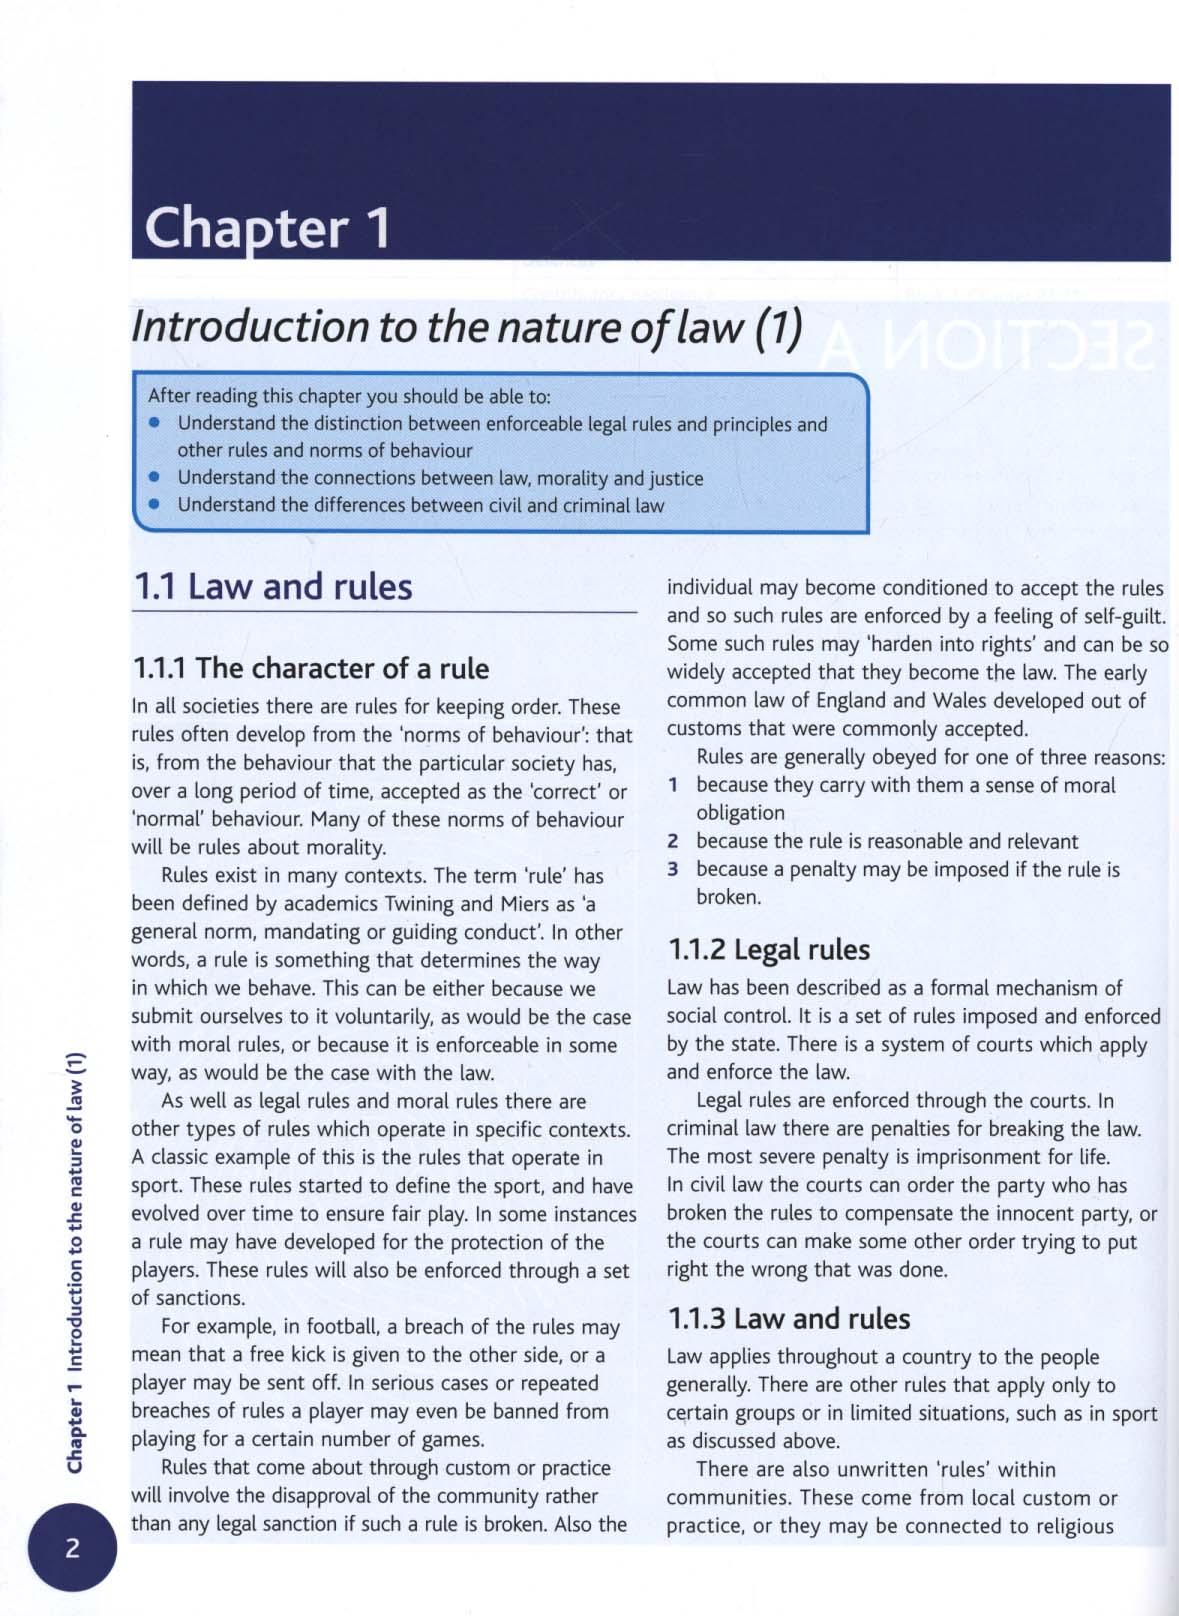 OCR AS/A Level Law Book 1